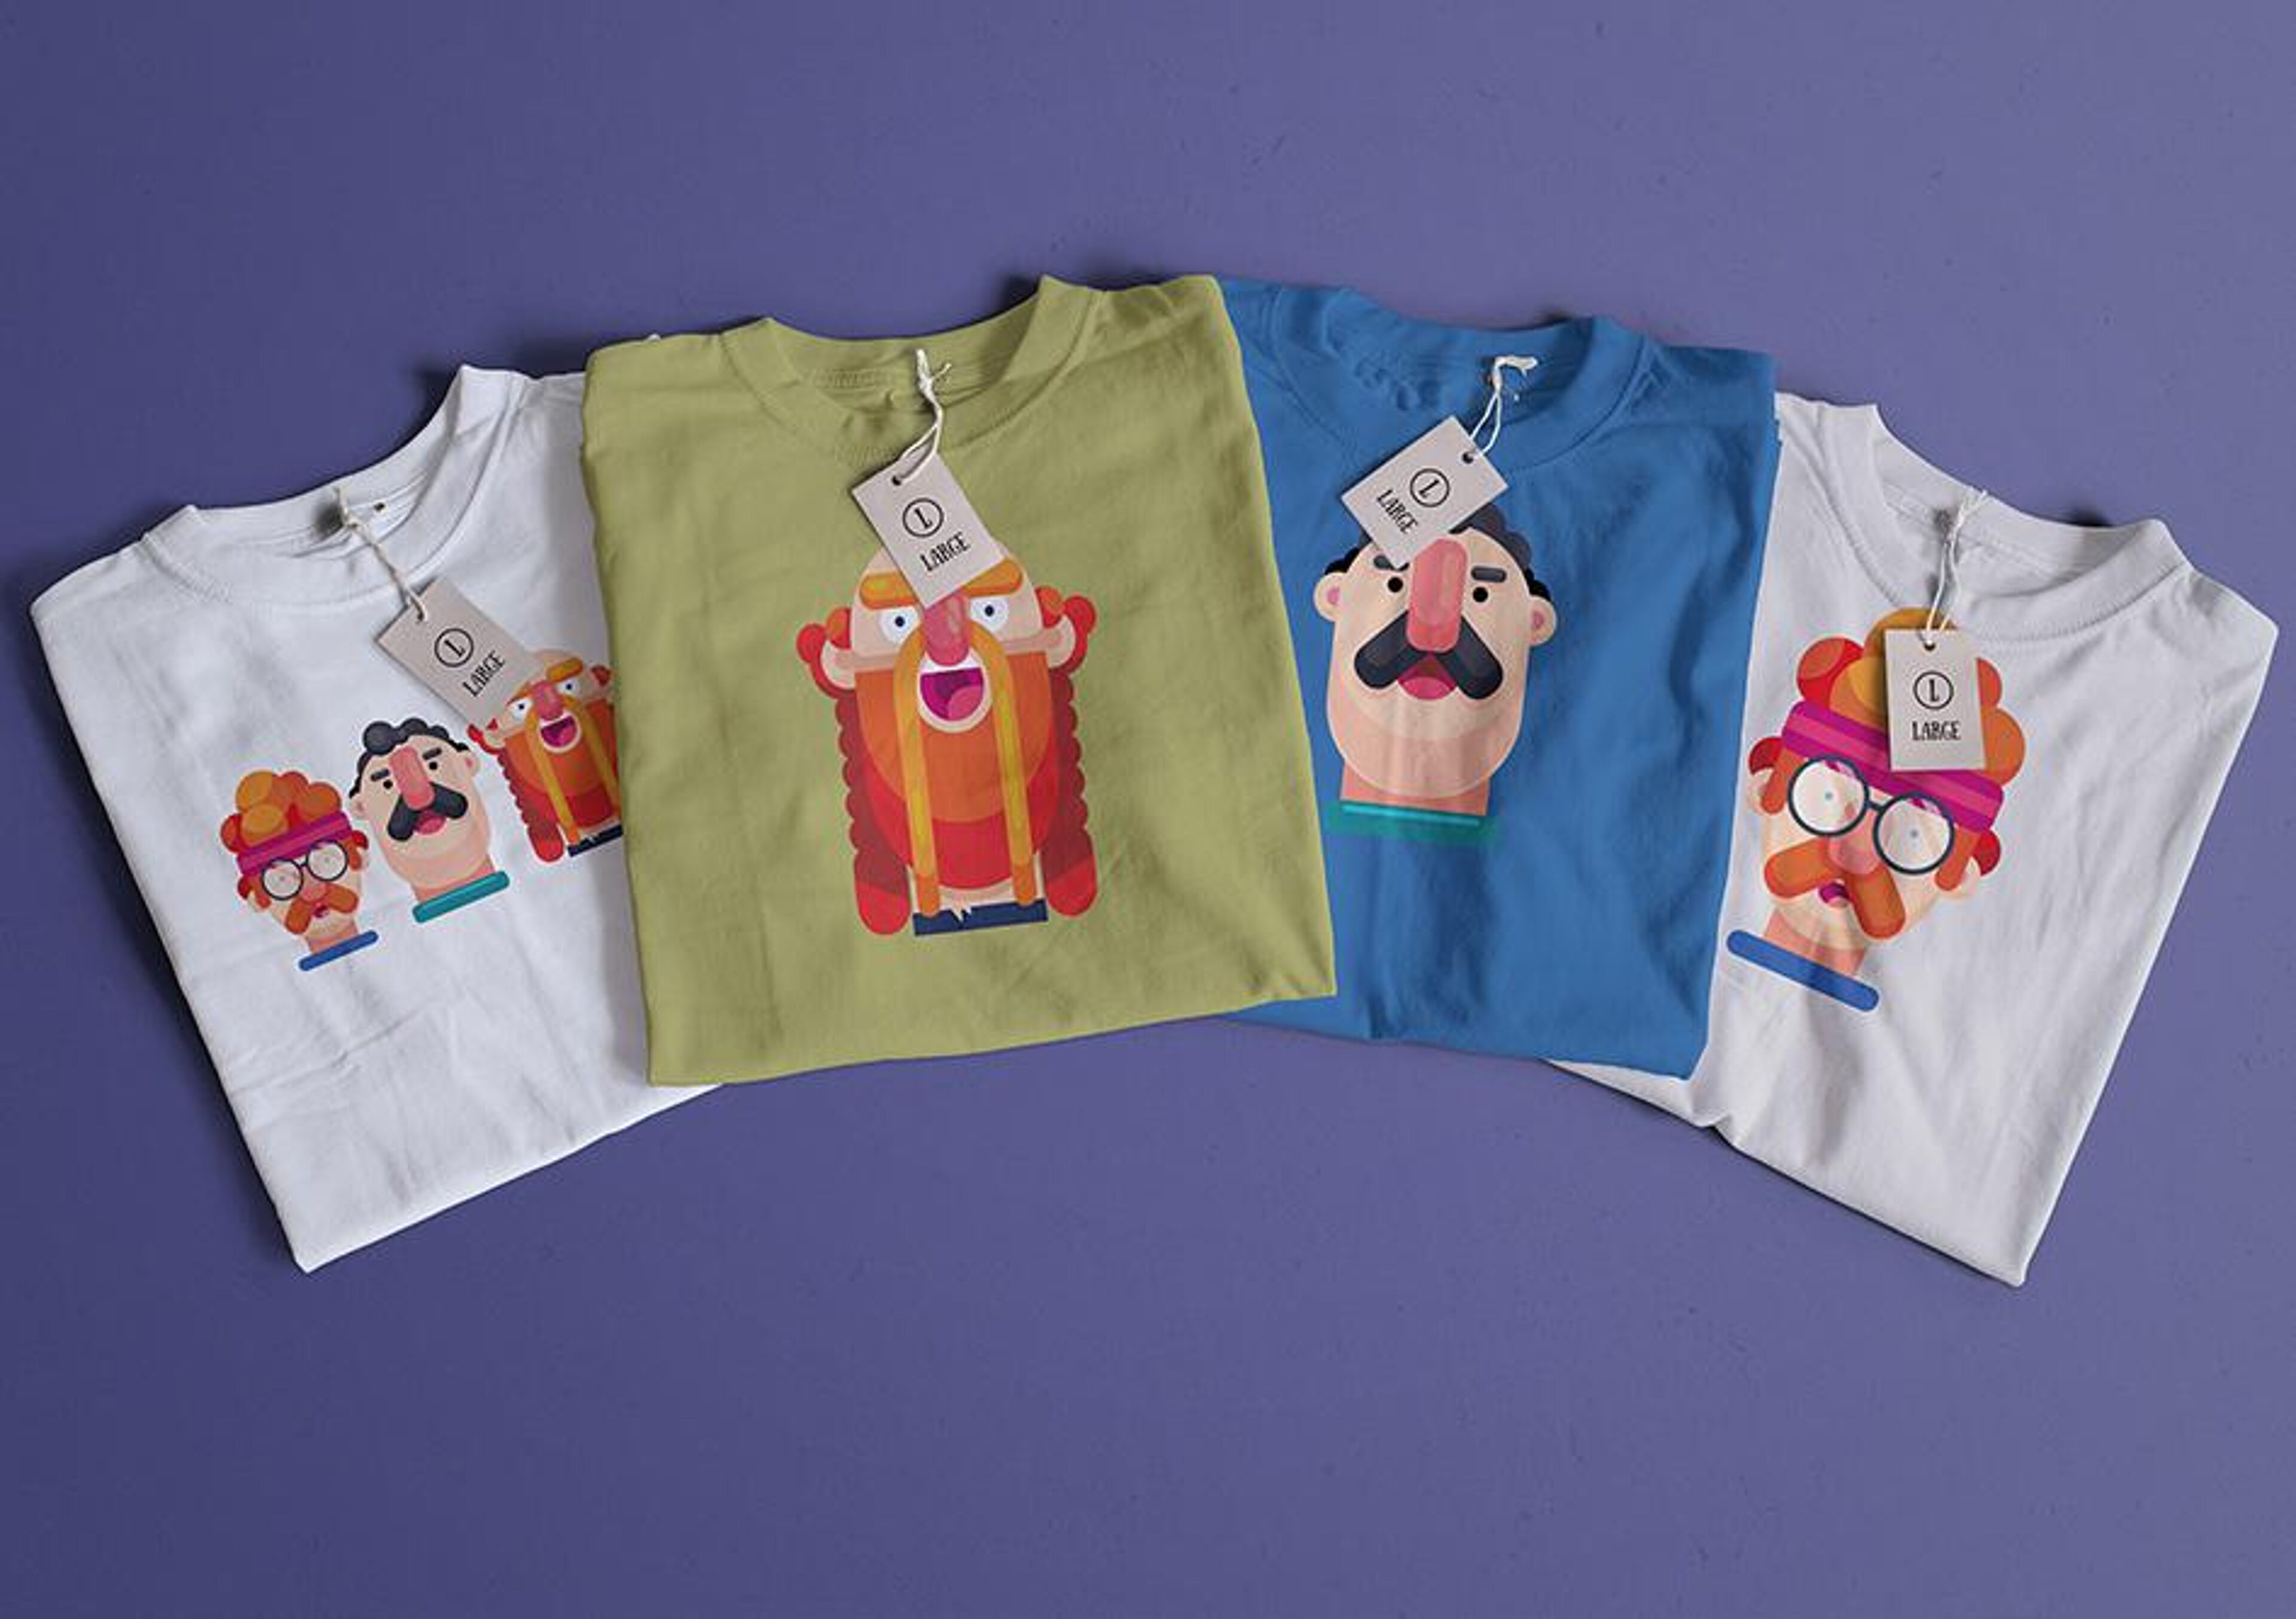 A collection of four t-shirts with playful cartoon prints, spread on a purple surface.